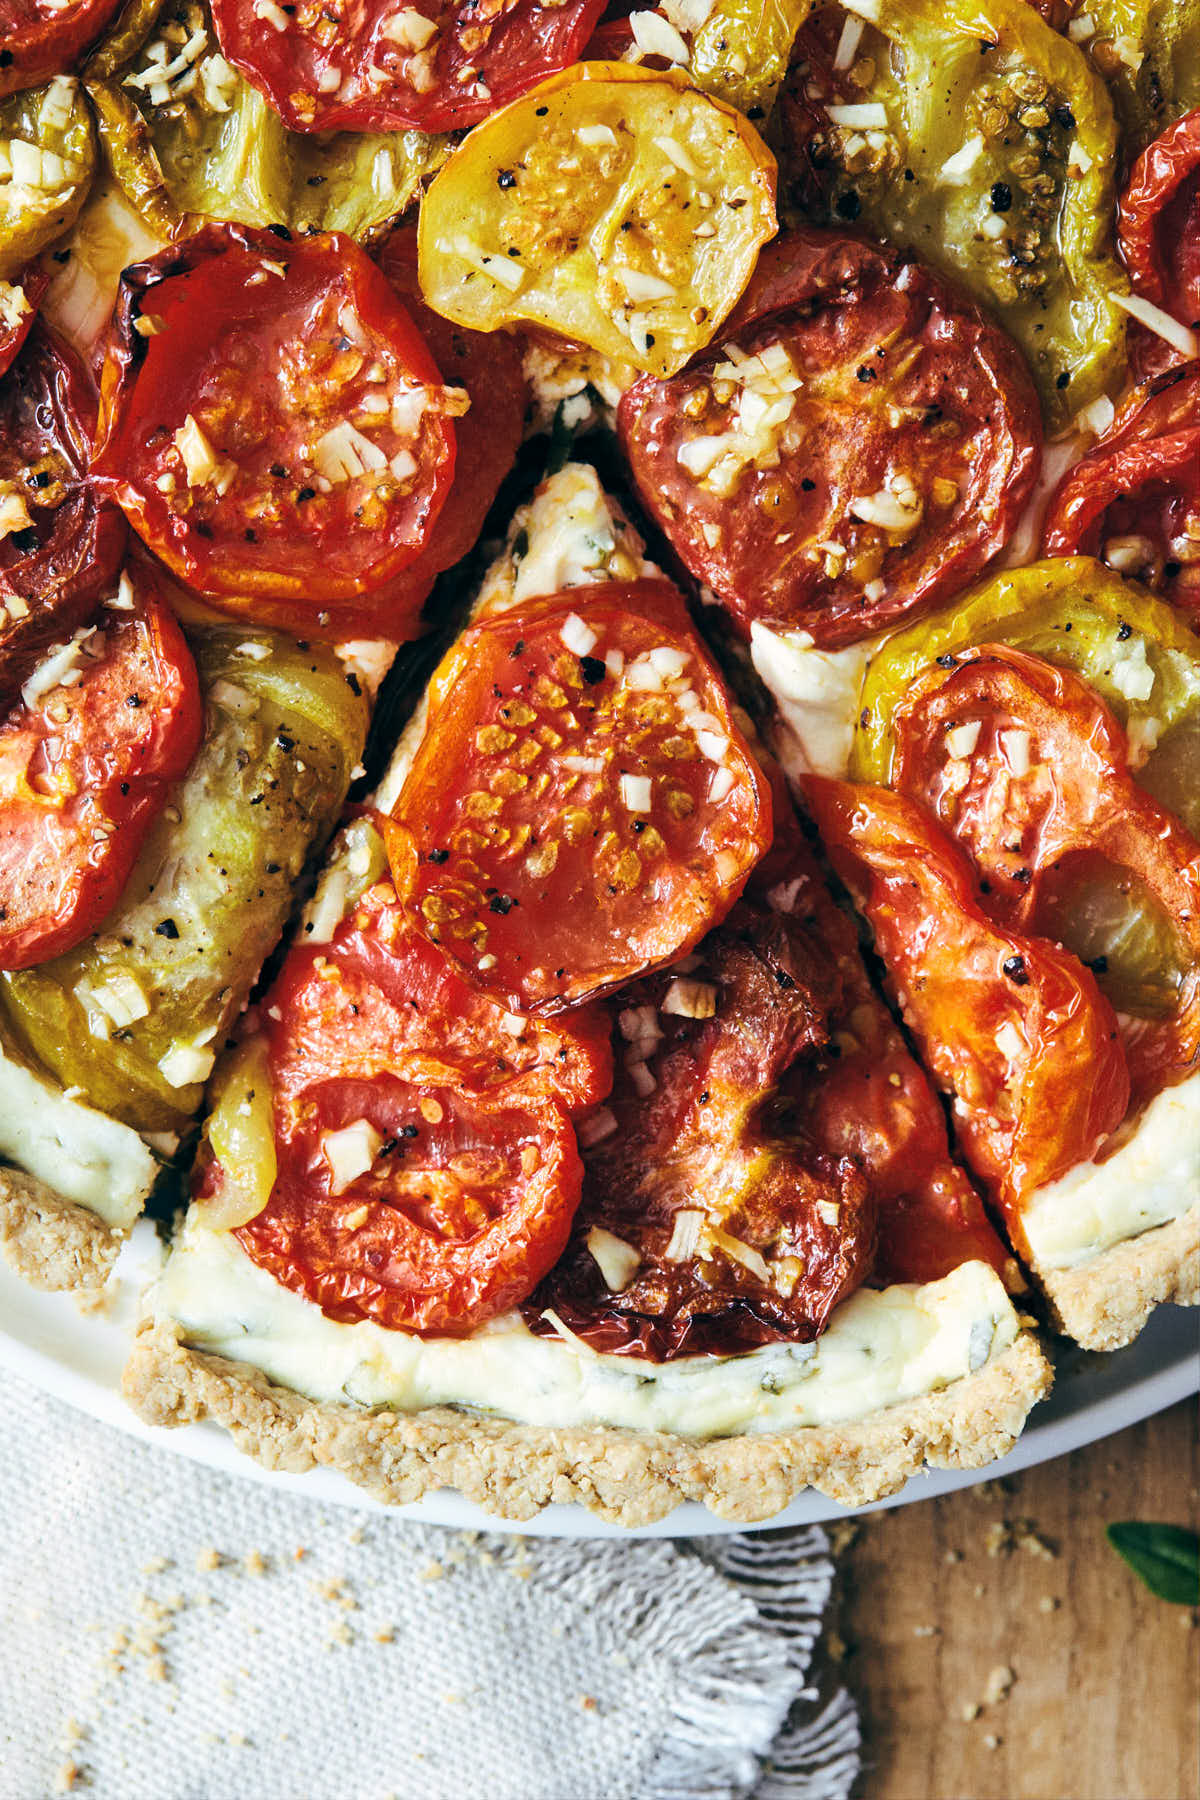 Heirloom tomato tart fresh out of the oven with a slice cut out